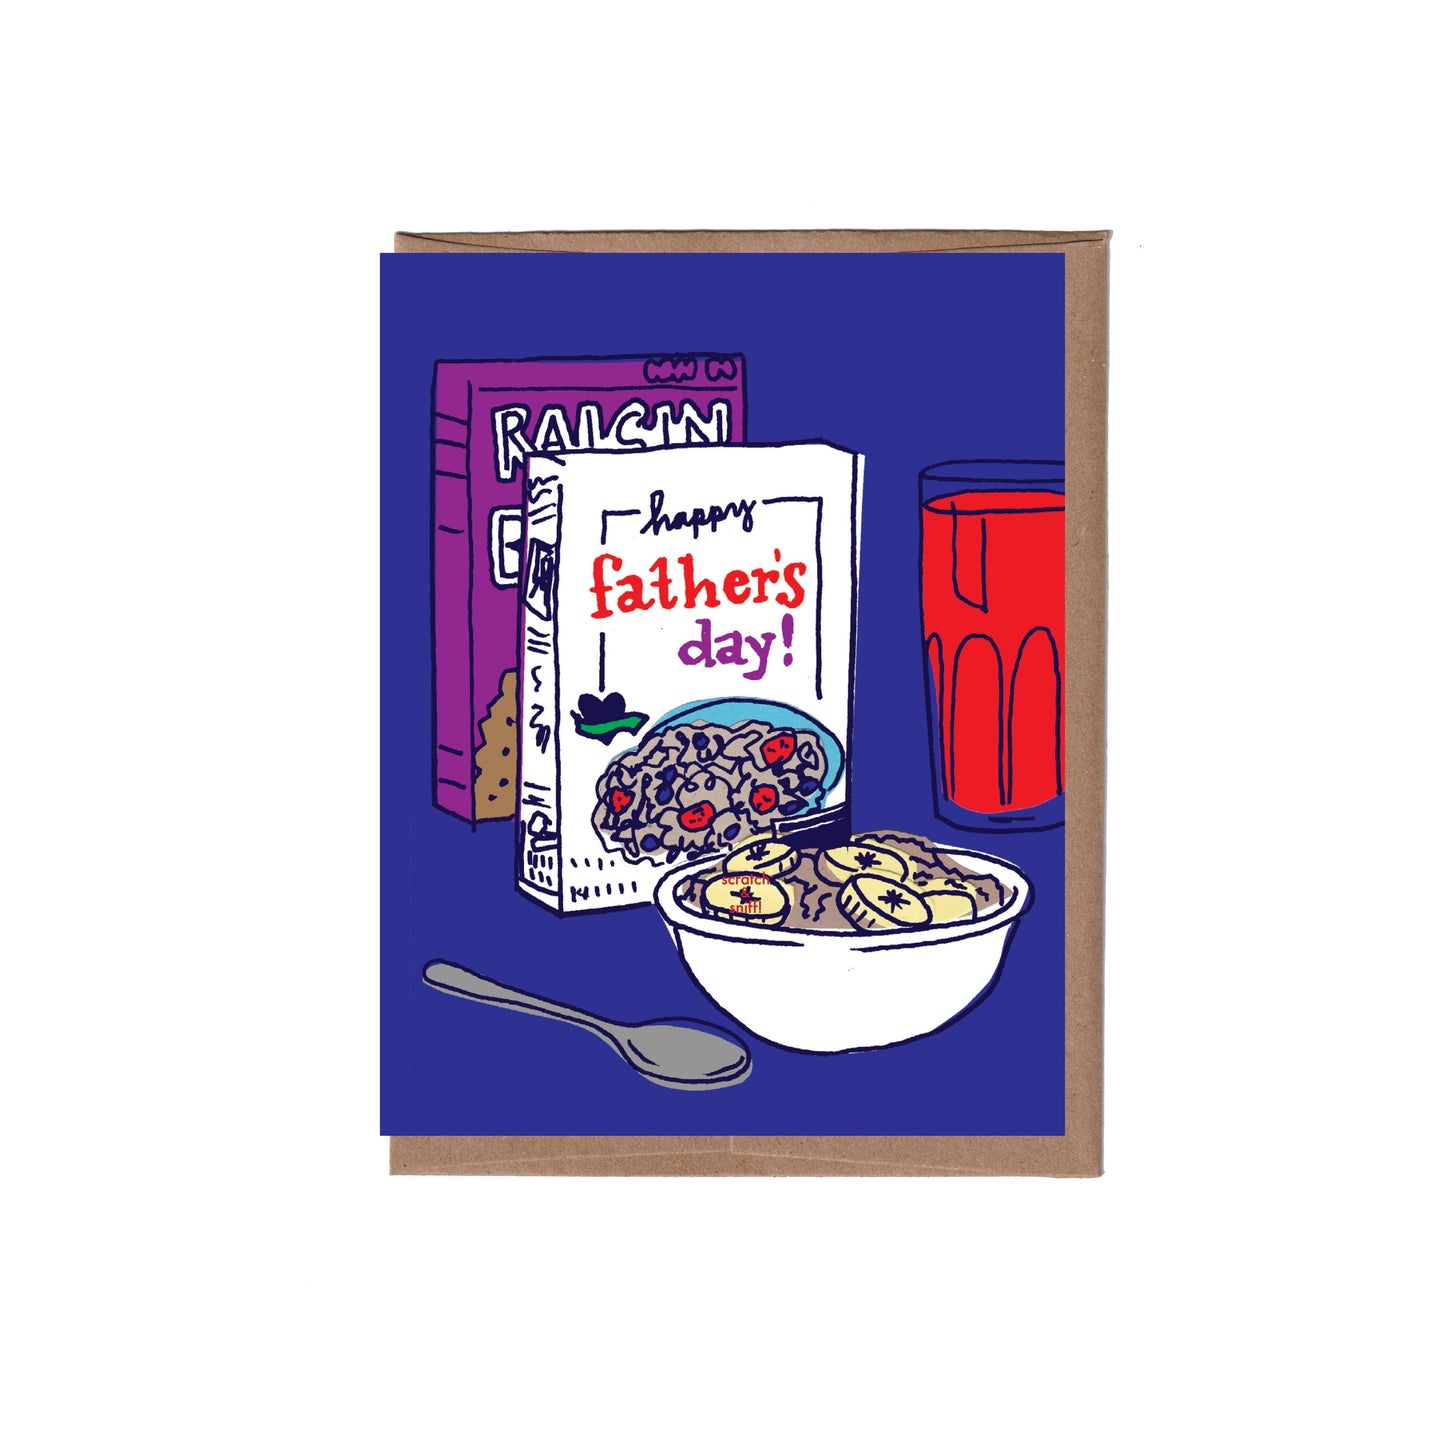 Scratch & Sniff Cereal Father's Day Card